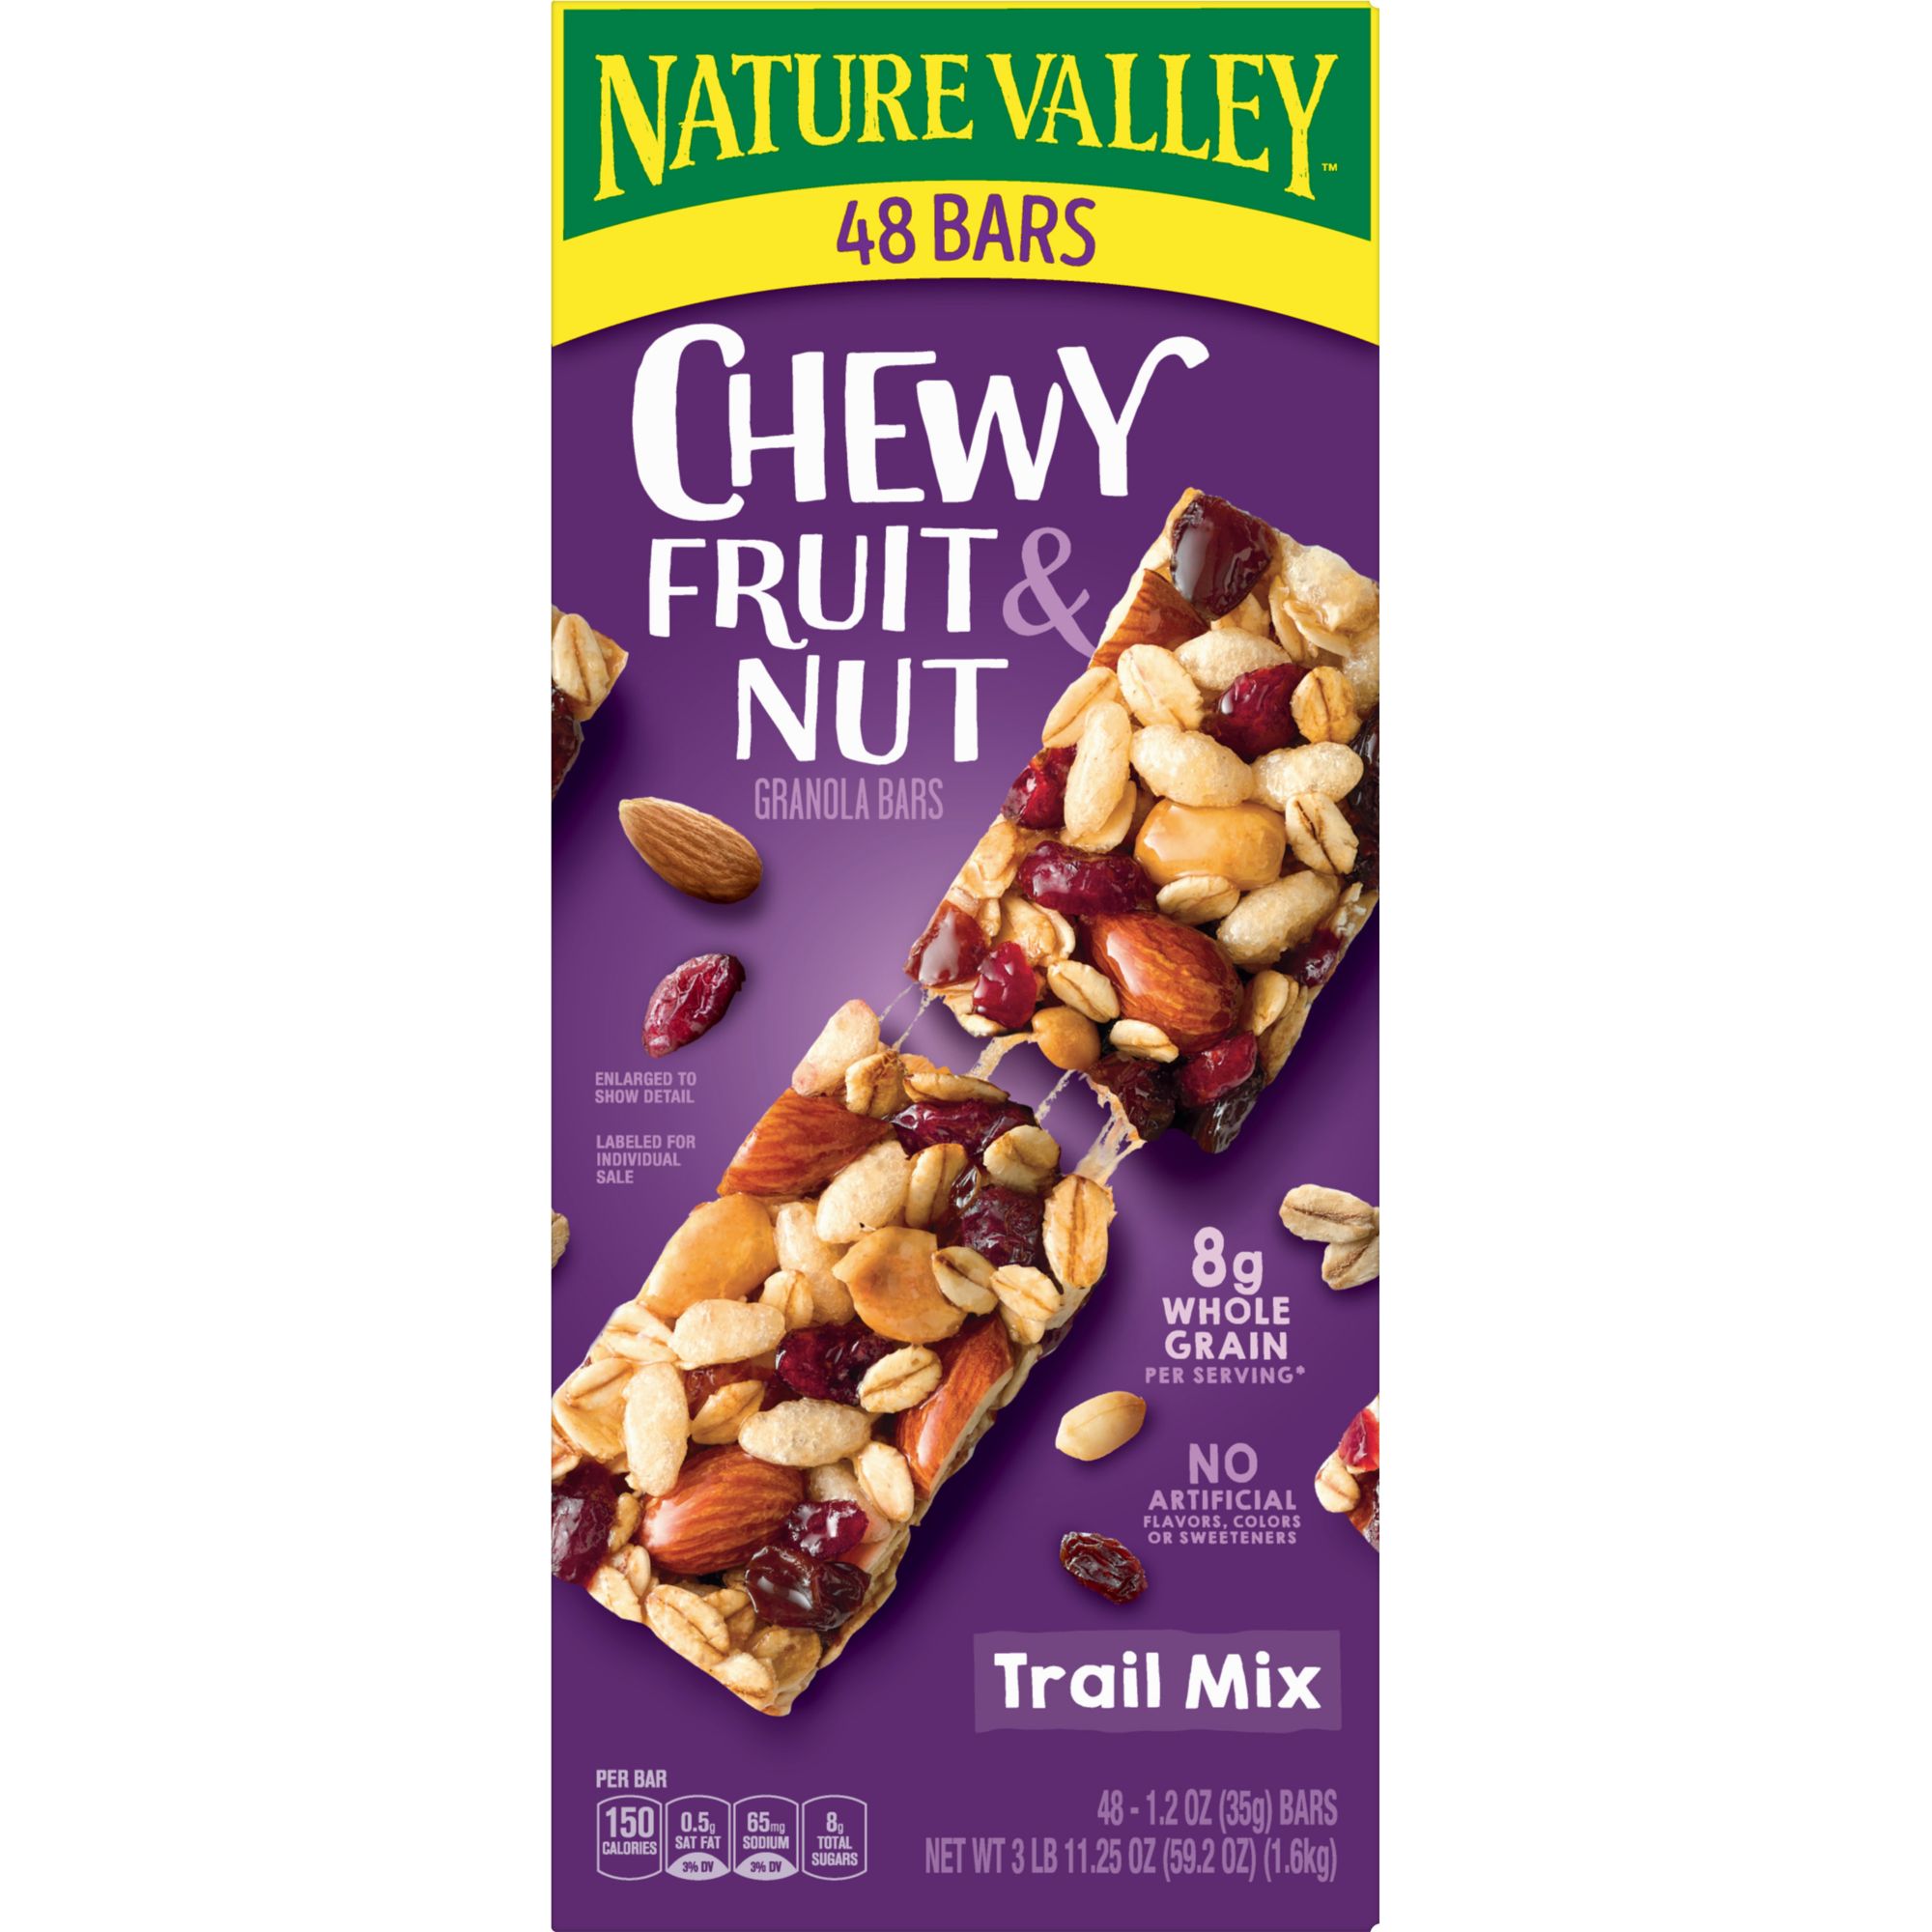 Nature Valley Fruit & Nut Trail Mix Chewy Granola Bars, 48 ct